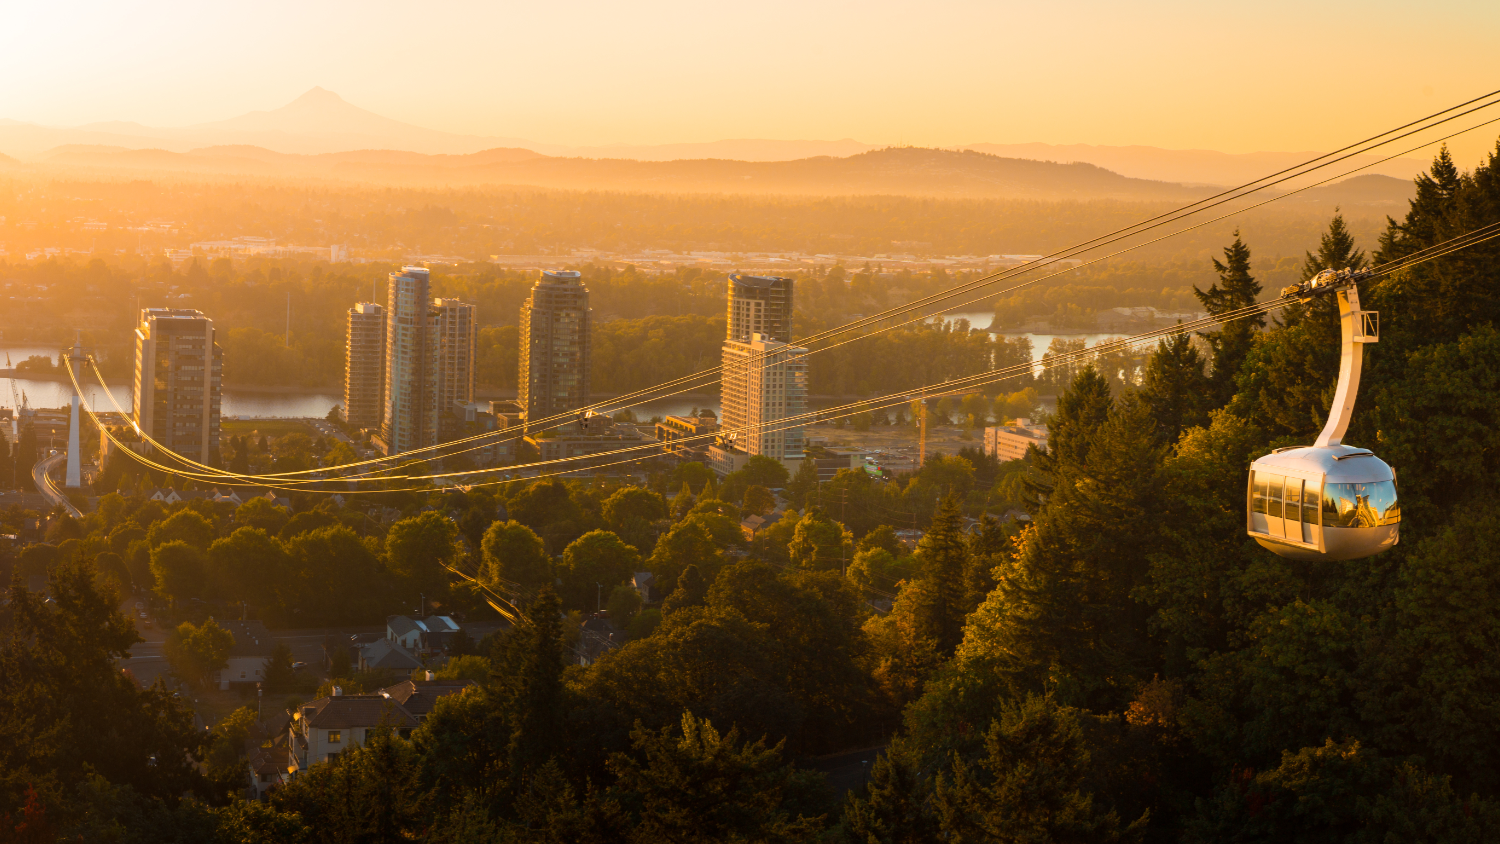 Photo of a cable car at sunrise in Portland, OR